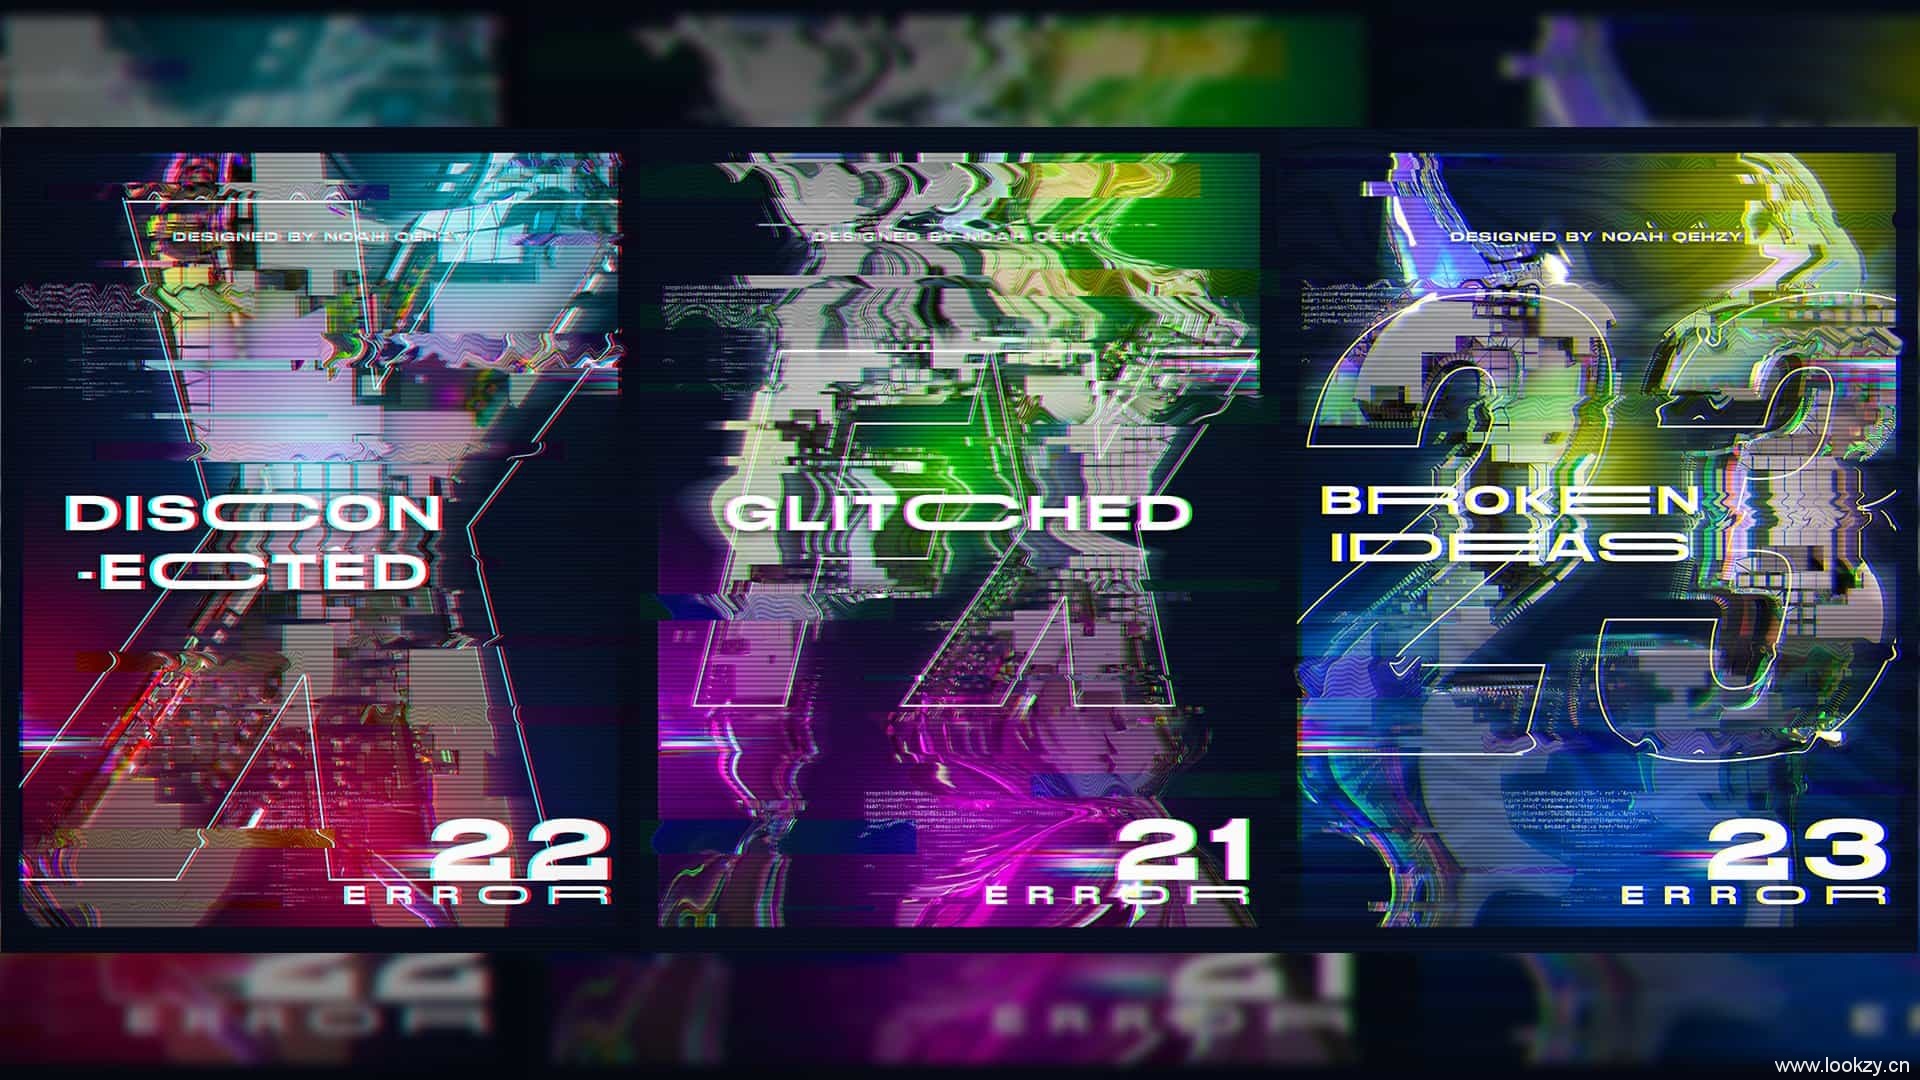 C4D搭配PS创建未来派毛刺故障3D海报教程Create Futuristic Glitched 3D Posters in C4D and Photoshop